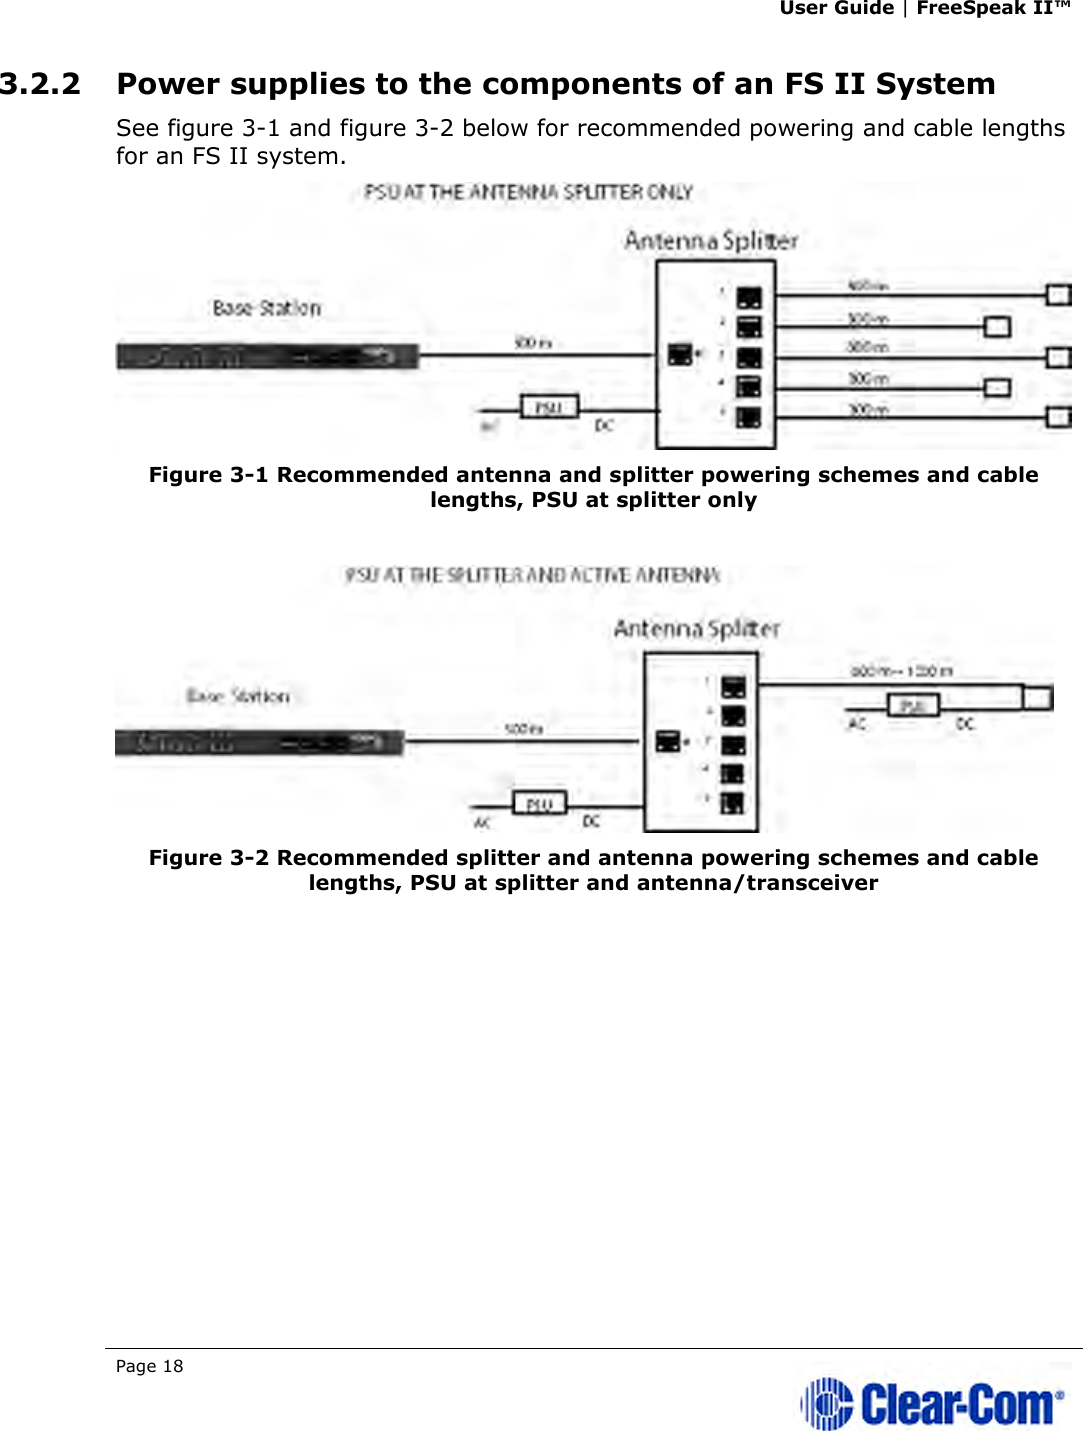 User Guide | FreeSpeak II™  Page 18   3.2.2 Power supplies to the components of an FS II System See figure 3-1 and figure 3-2 below for recommended powering and cable lengths for an FS II system.   Figure 3-1 Recommended antenna and splitter powering schemes and cable lengths, PSU at splitter only    Figure 3-2 Recommended splitter and antenna powering schemes and cable lengths, PSU at splitter and antenna/transceiver   